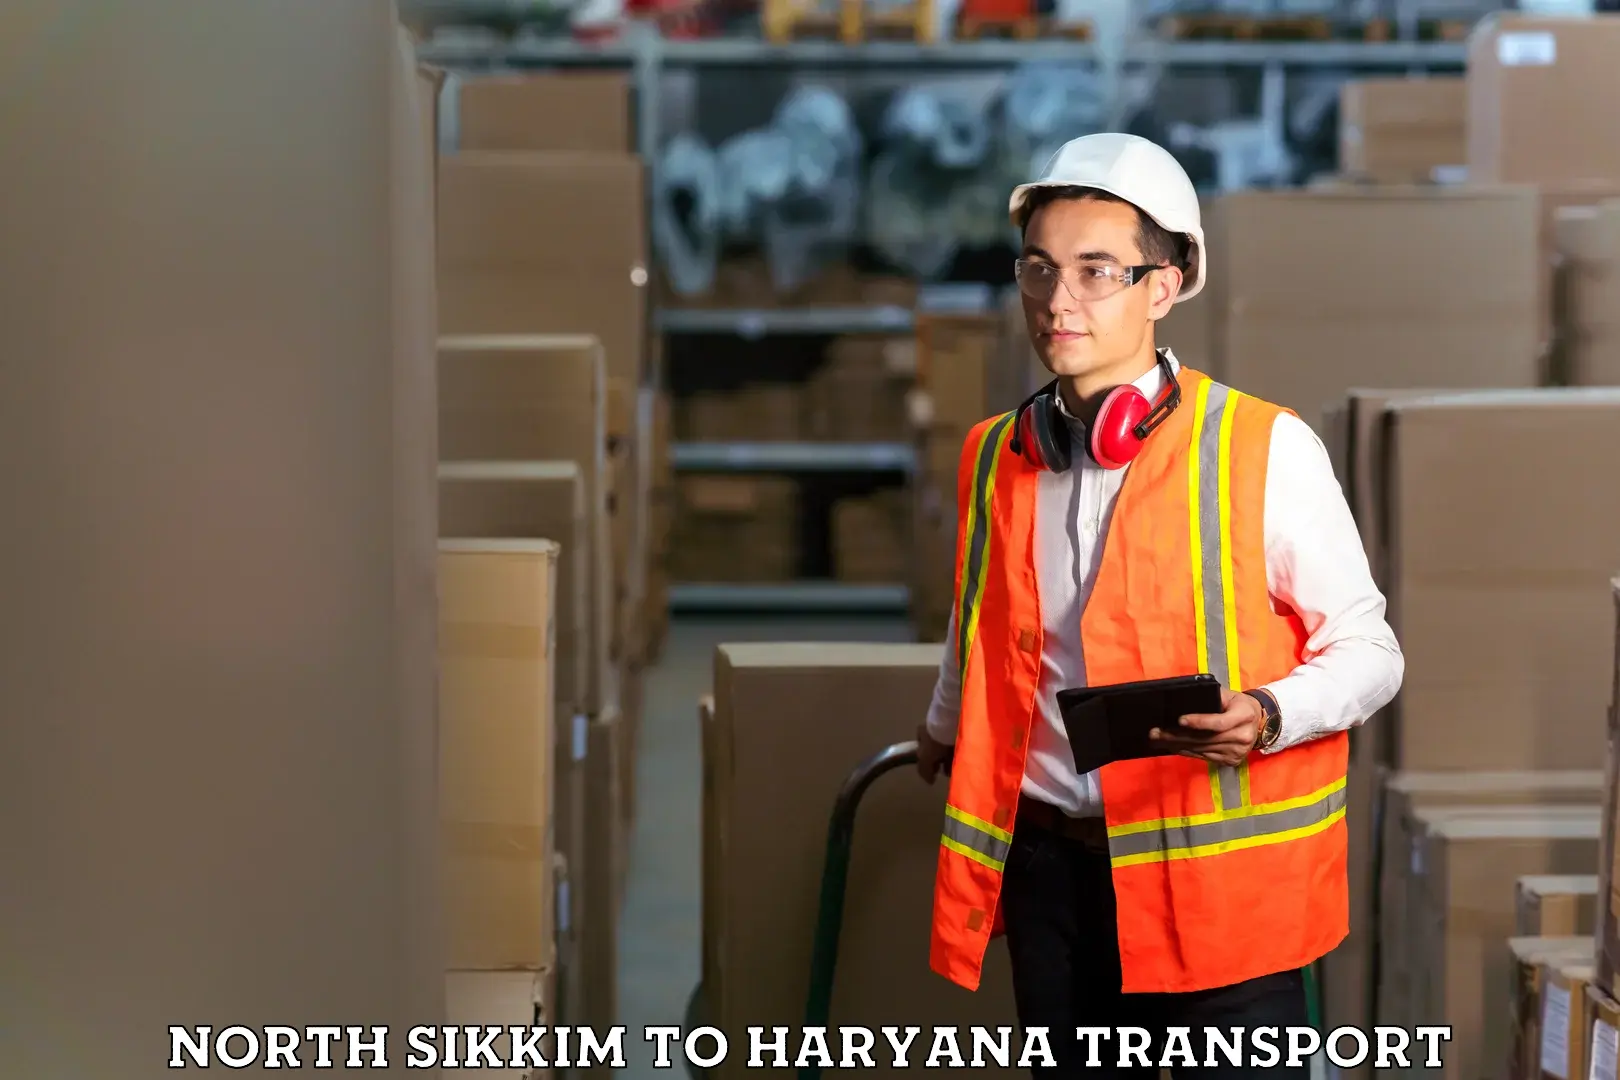 Container transport service North Sikkim to Haryana